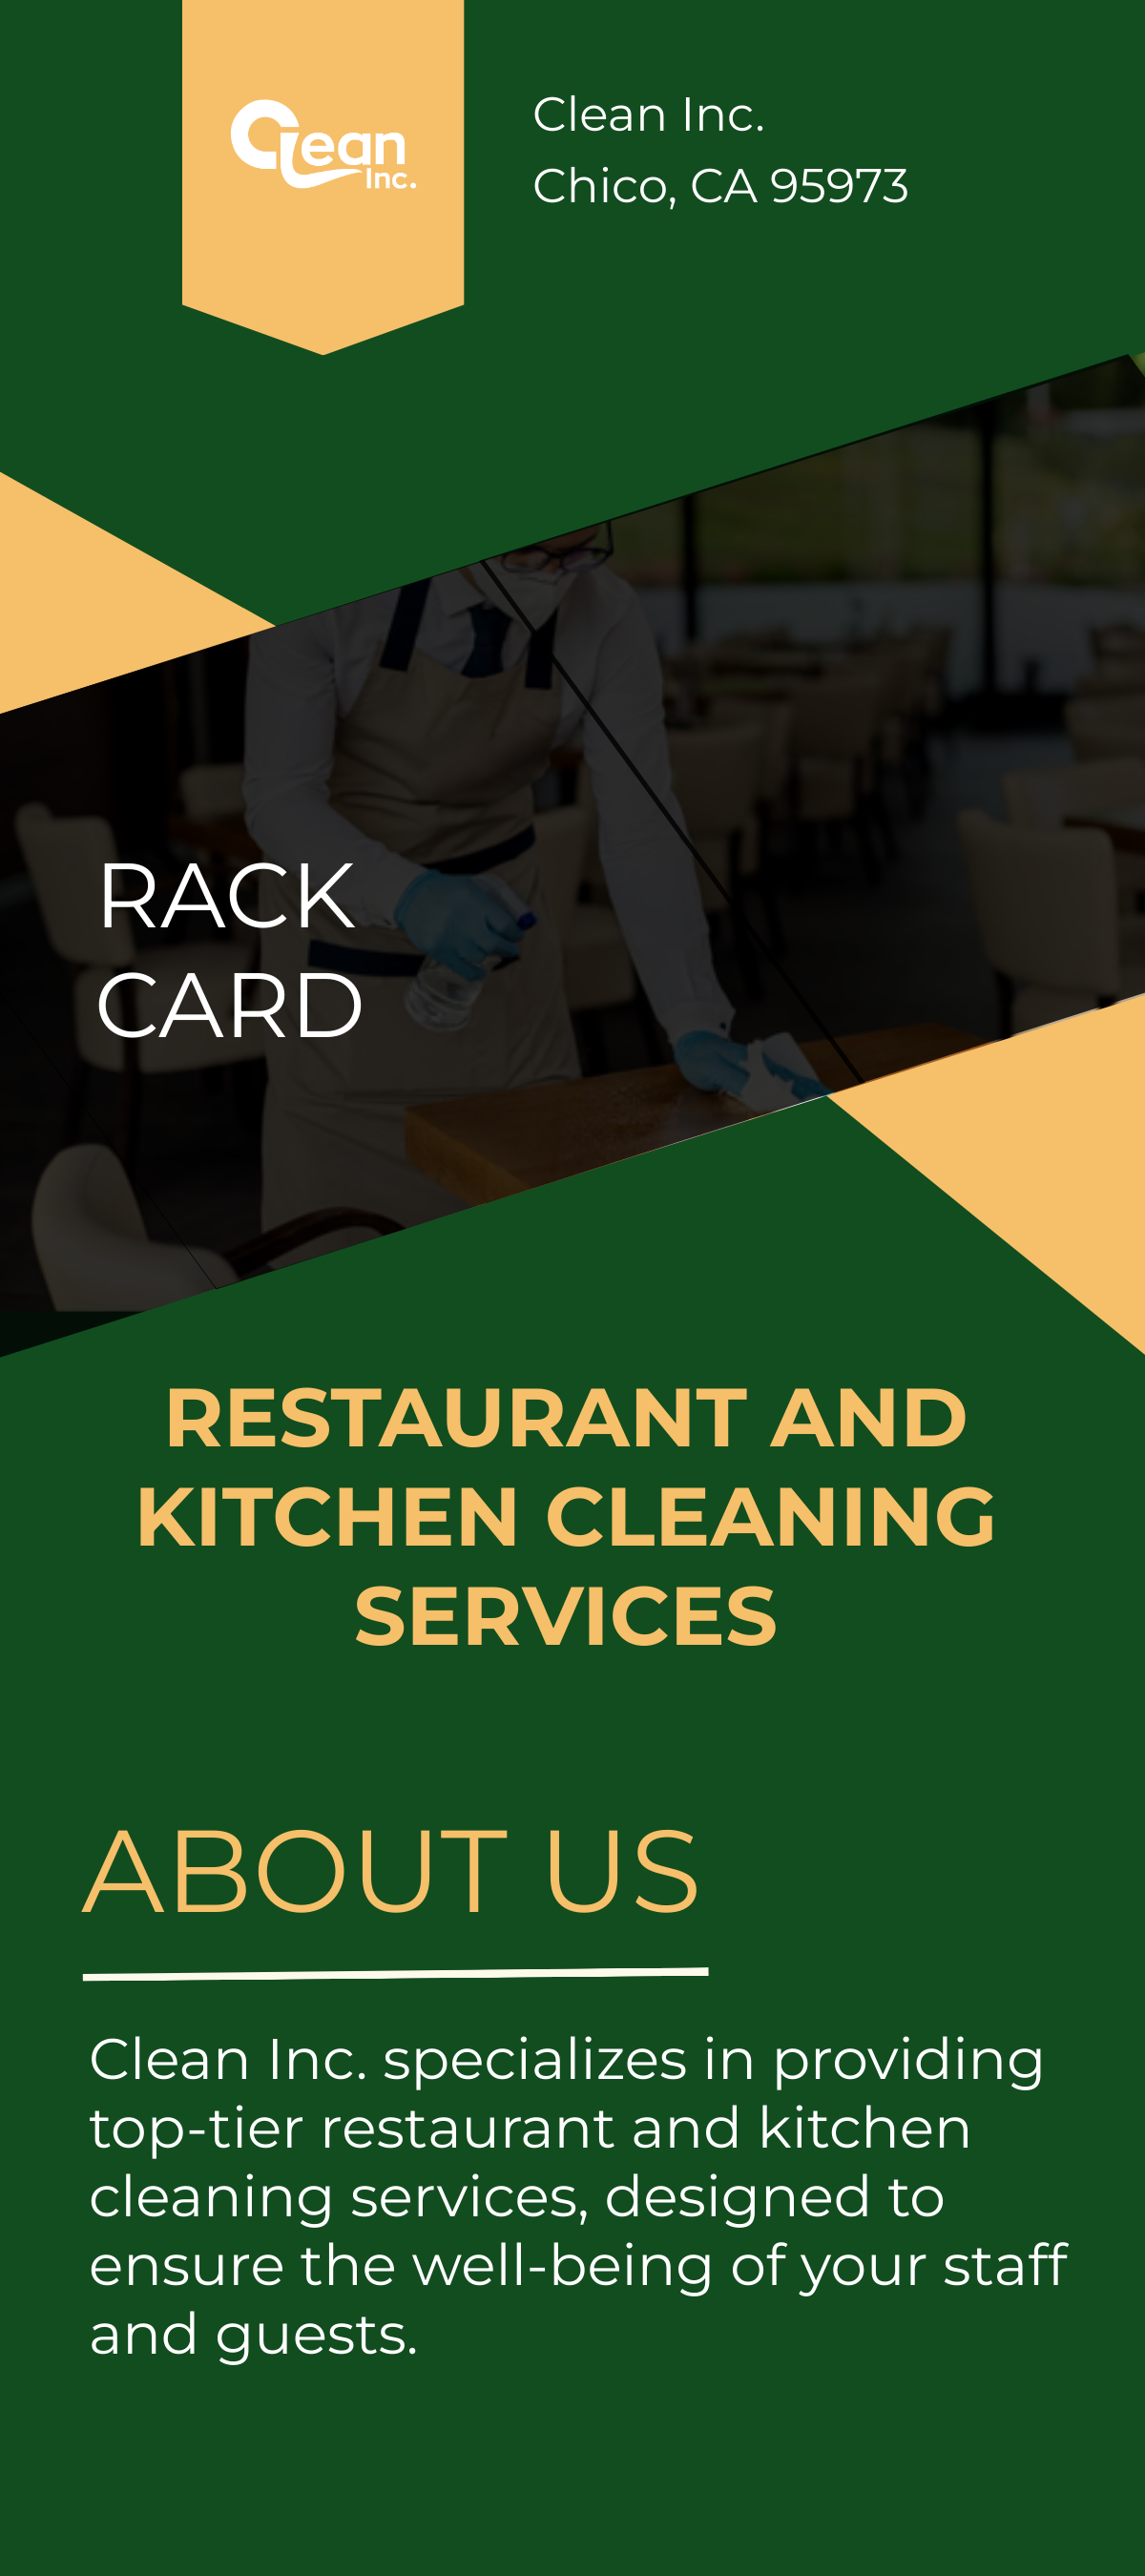 Restaurant and Kitchen Cleaning Services Rack Card Template